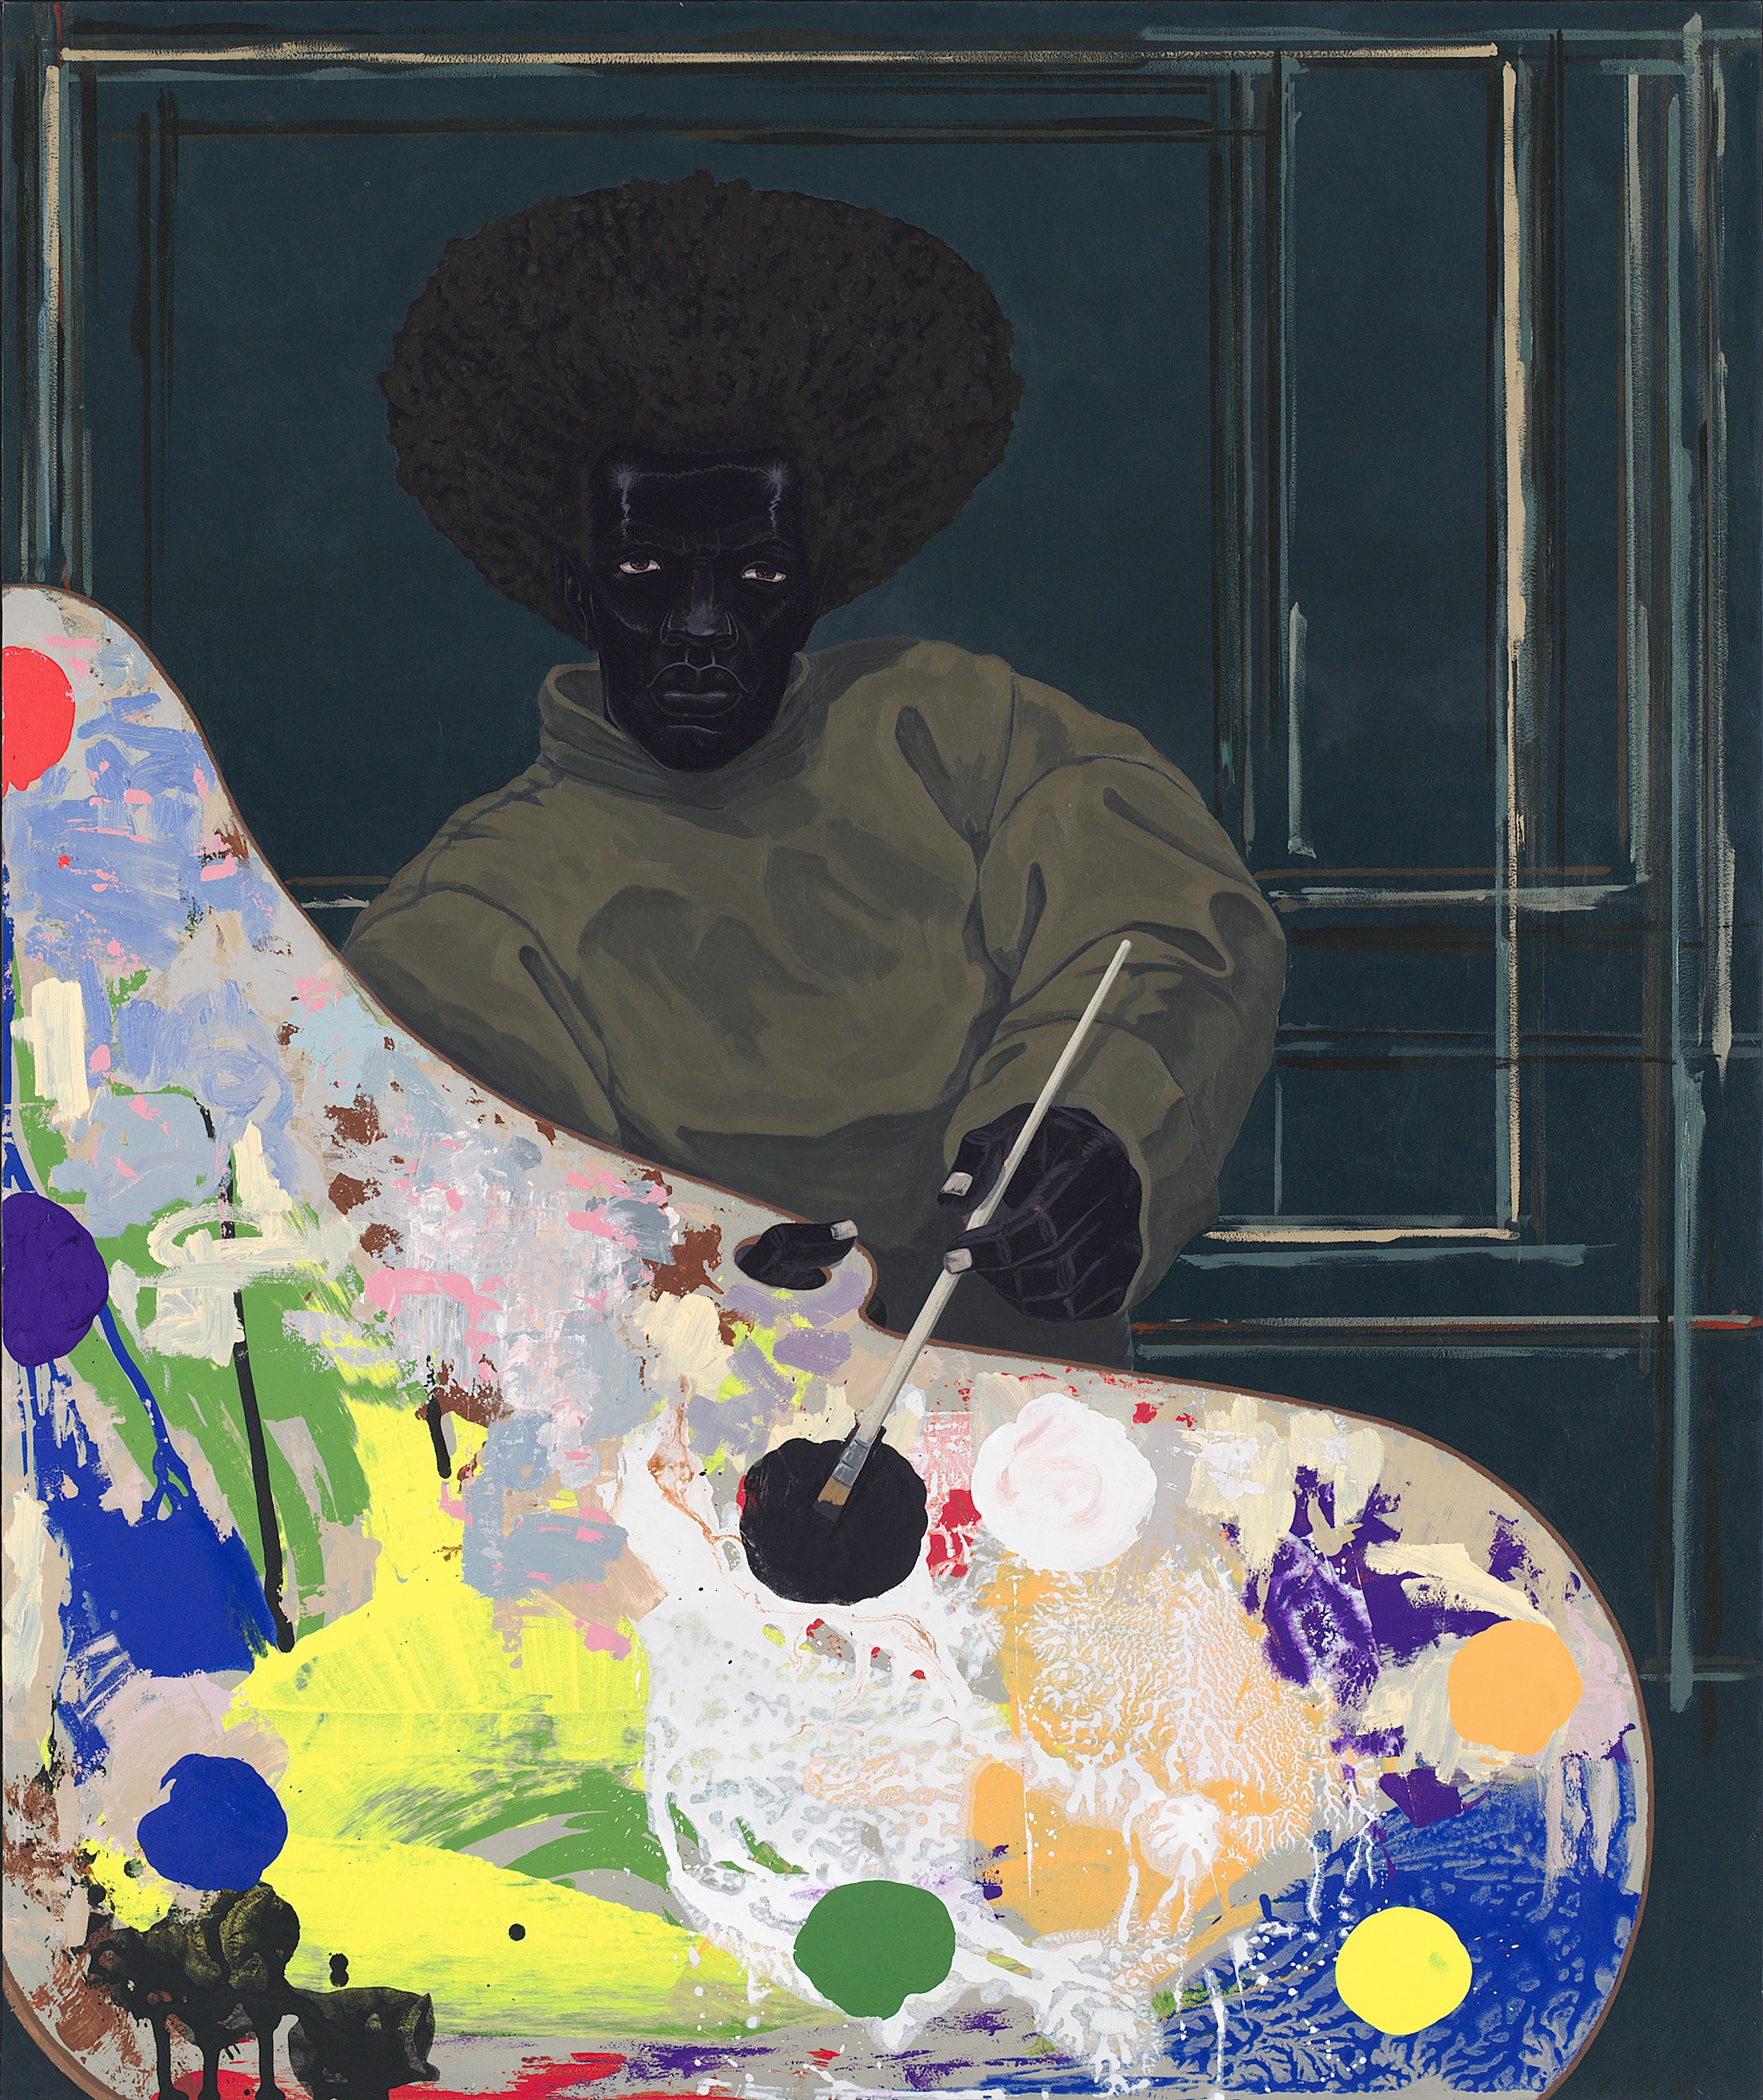 Untitled work by Kerry James Marshall from 2008 depict an artist, palette in hand, gazing out at the viewer.